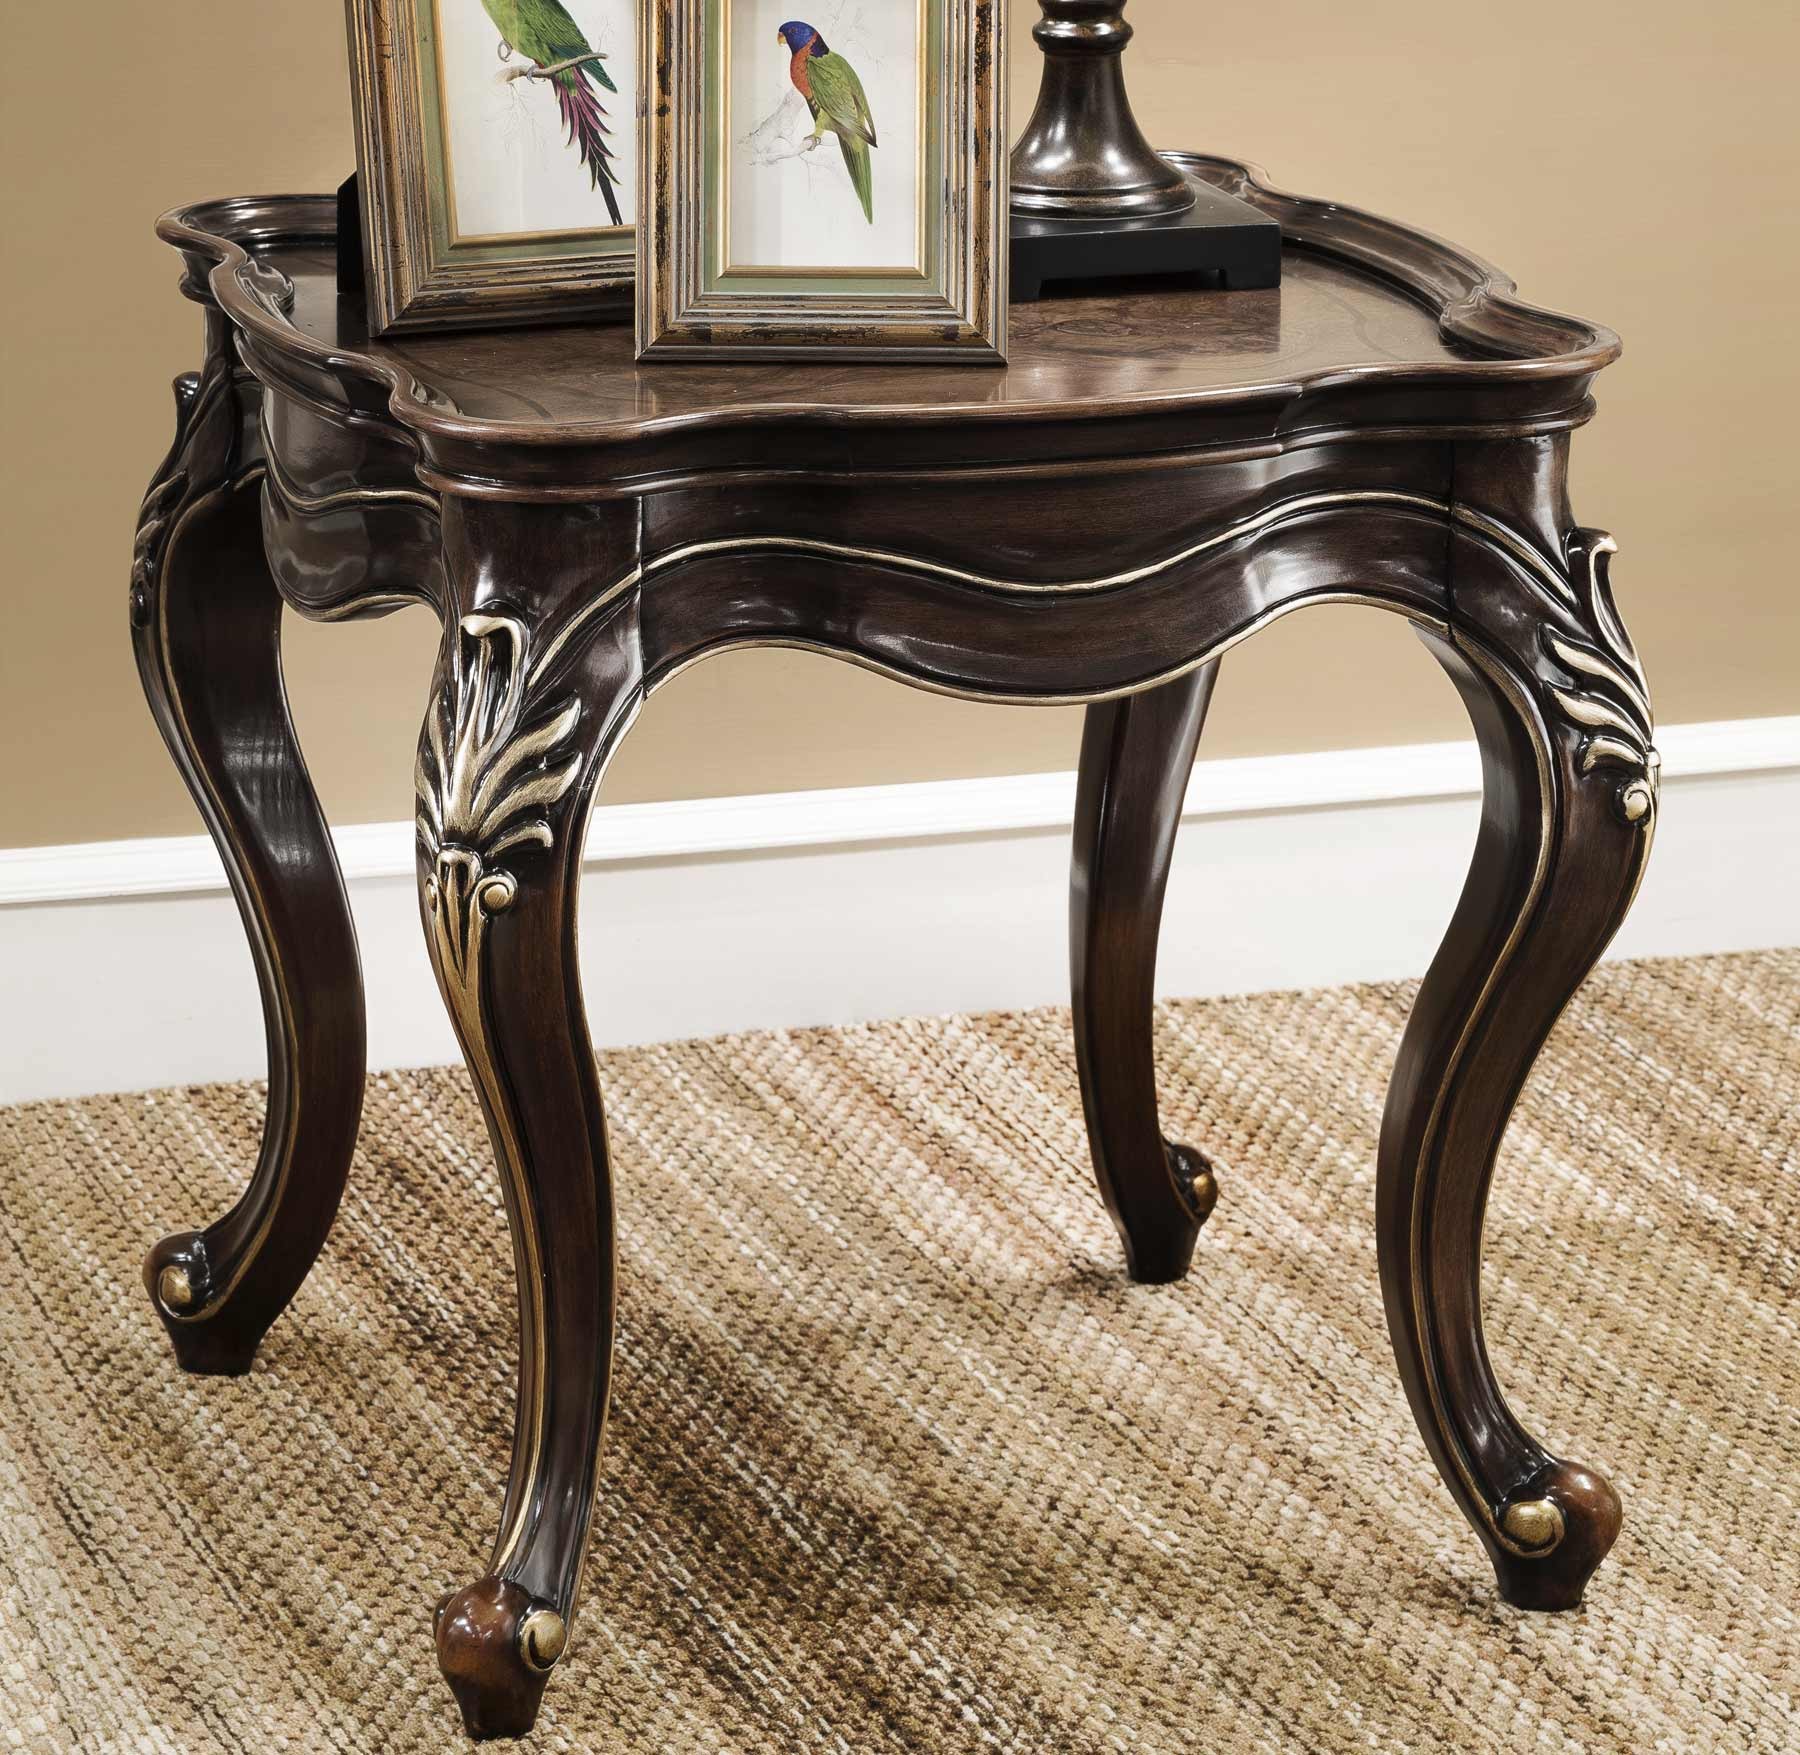 Mayfair End Table shown in Vintage Truffle finish